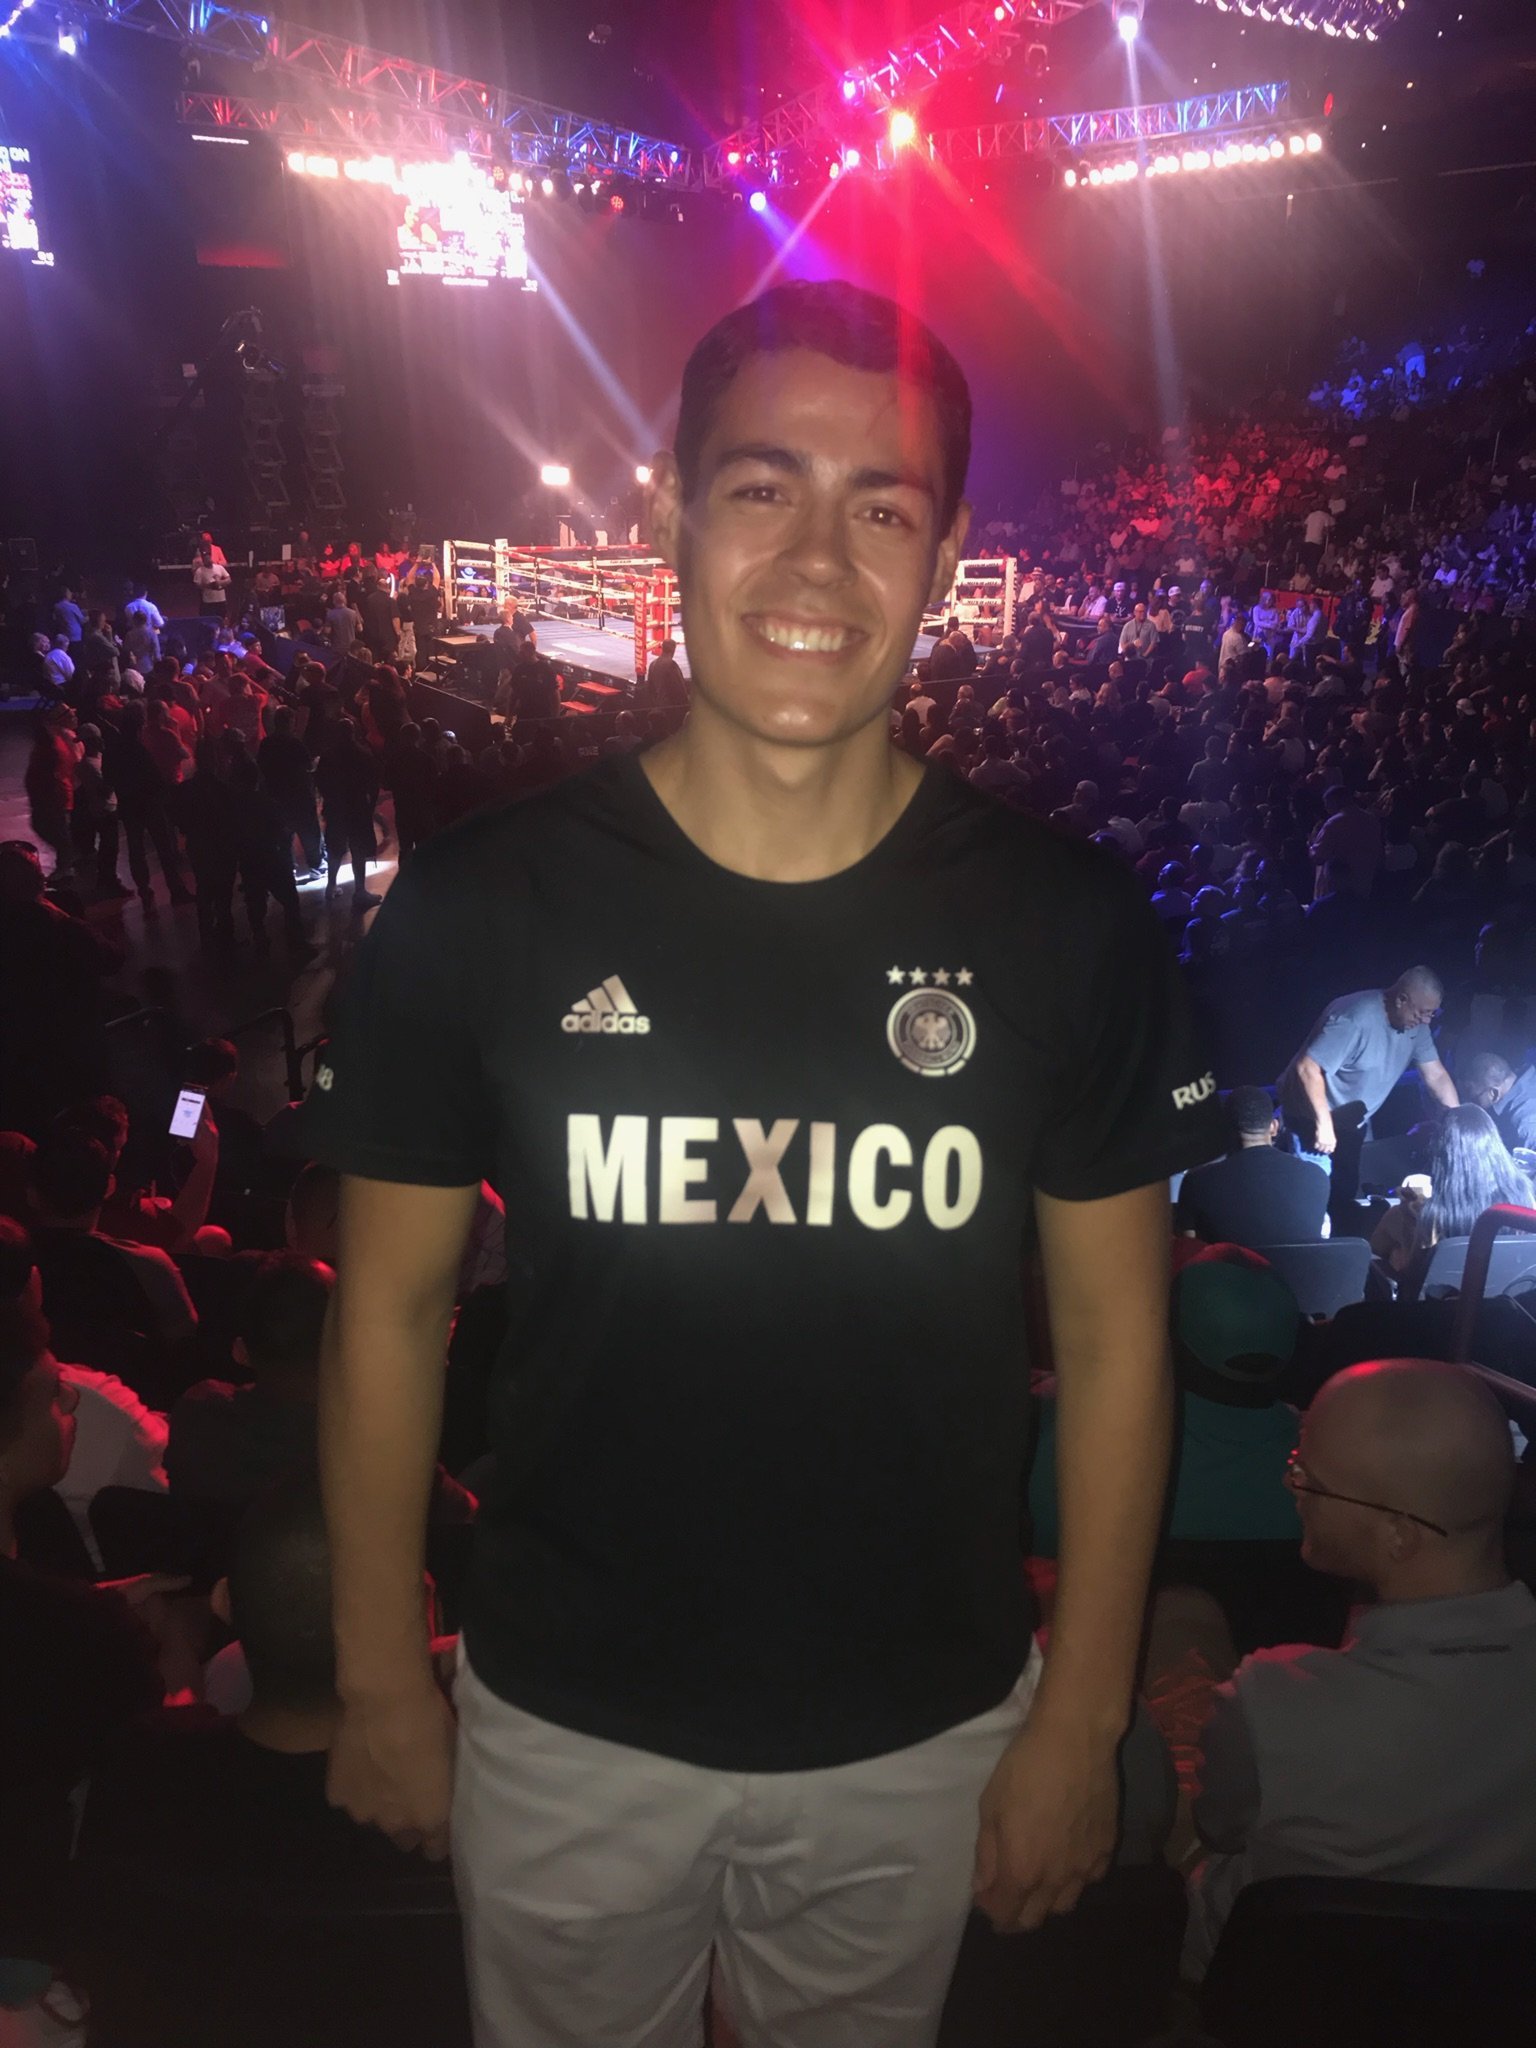 Fast Results from Arizona: Pedraza Takes Down Beltran; Dogboe Sizzles – The  Sweet Science